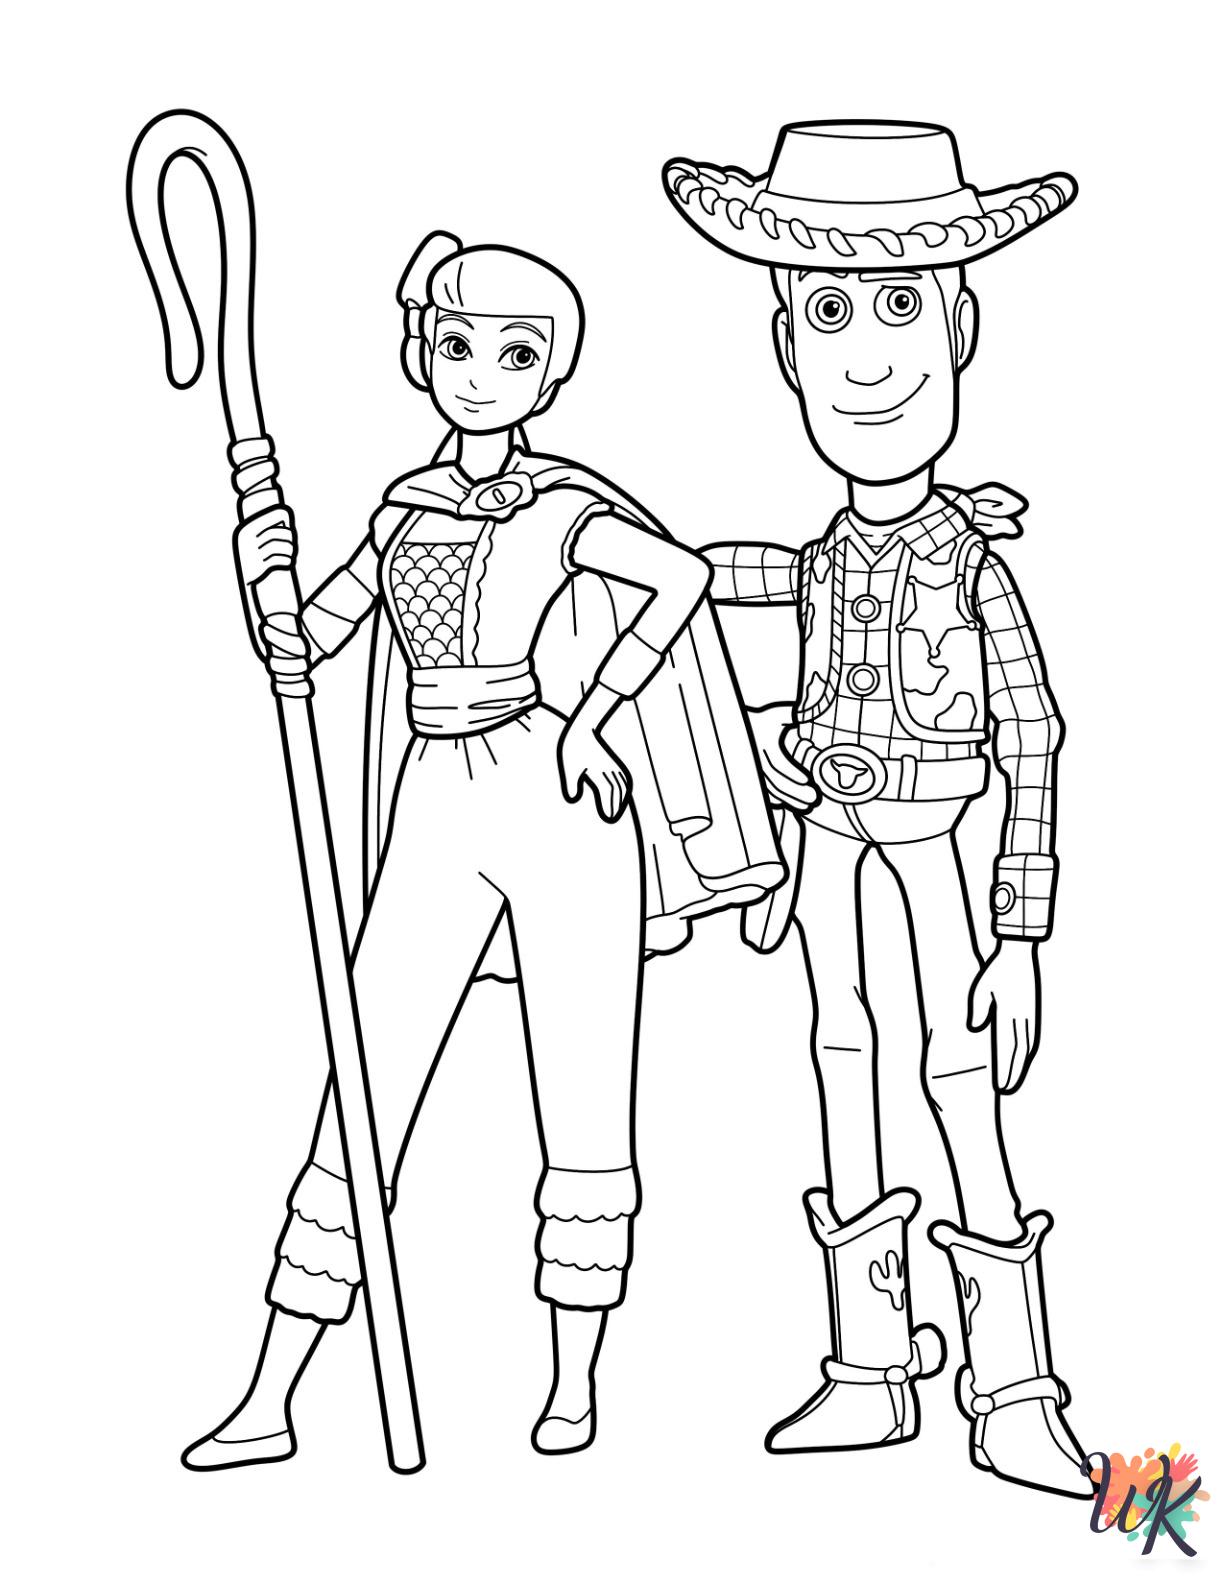 Woody decorations coloring pages